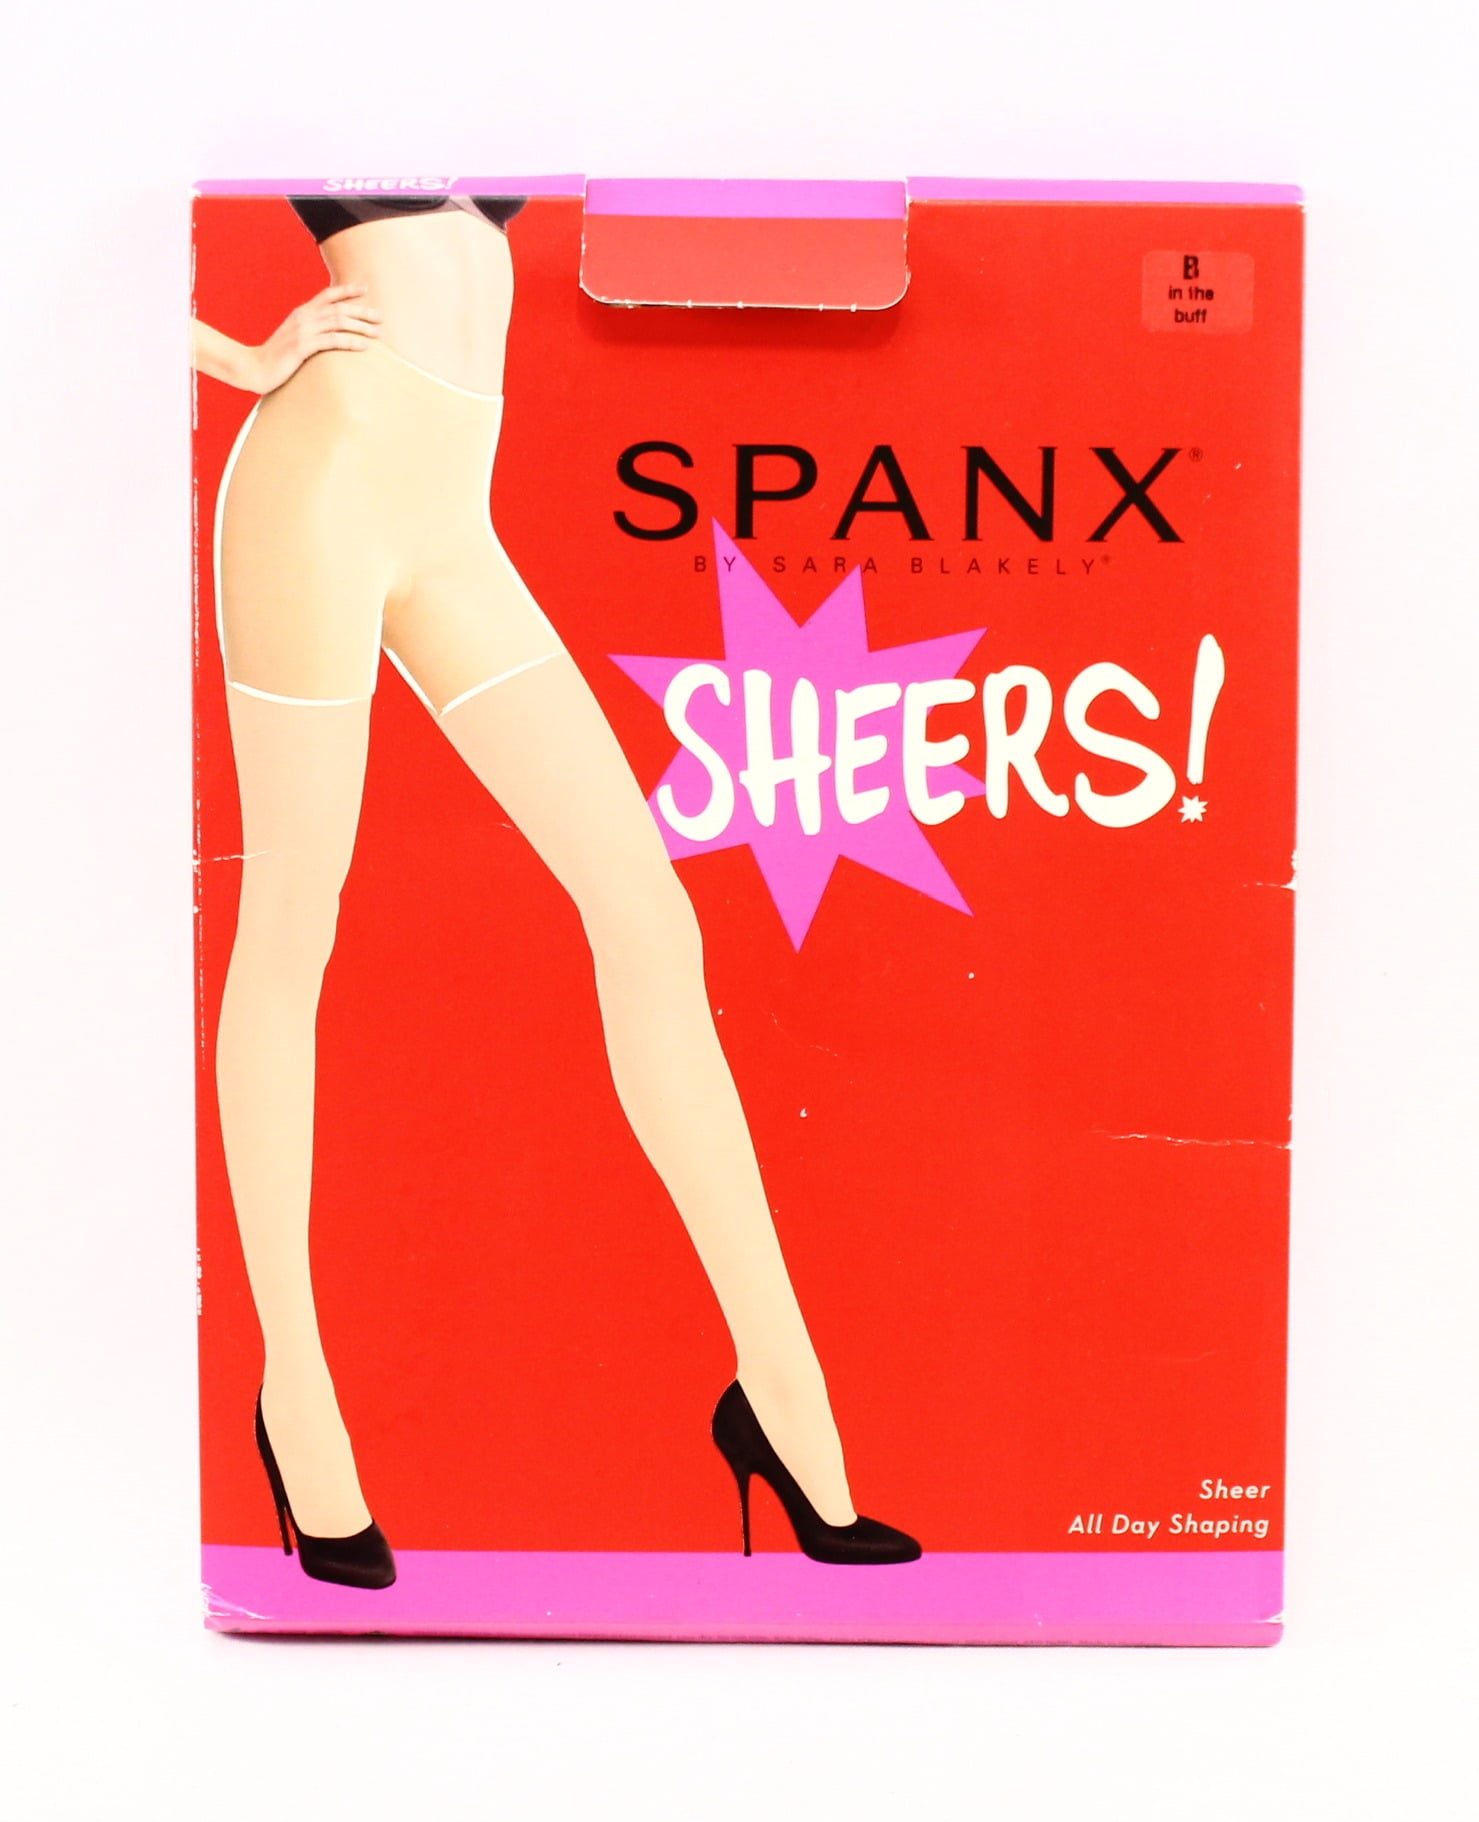 Spanx By Sara Blakely NEW Beige Nude Women's Size B Pantyhose Sheers DEAL 